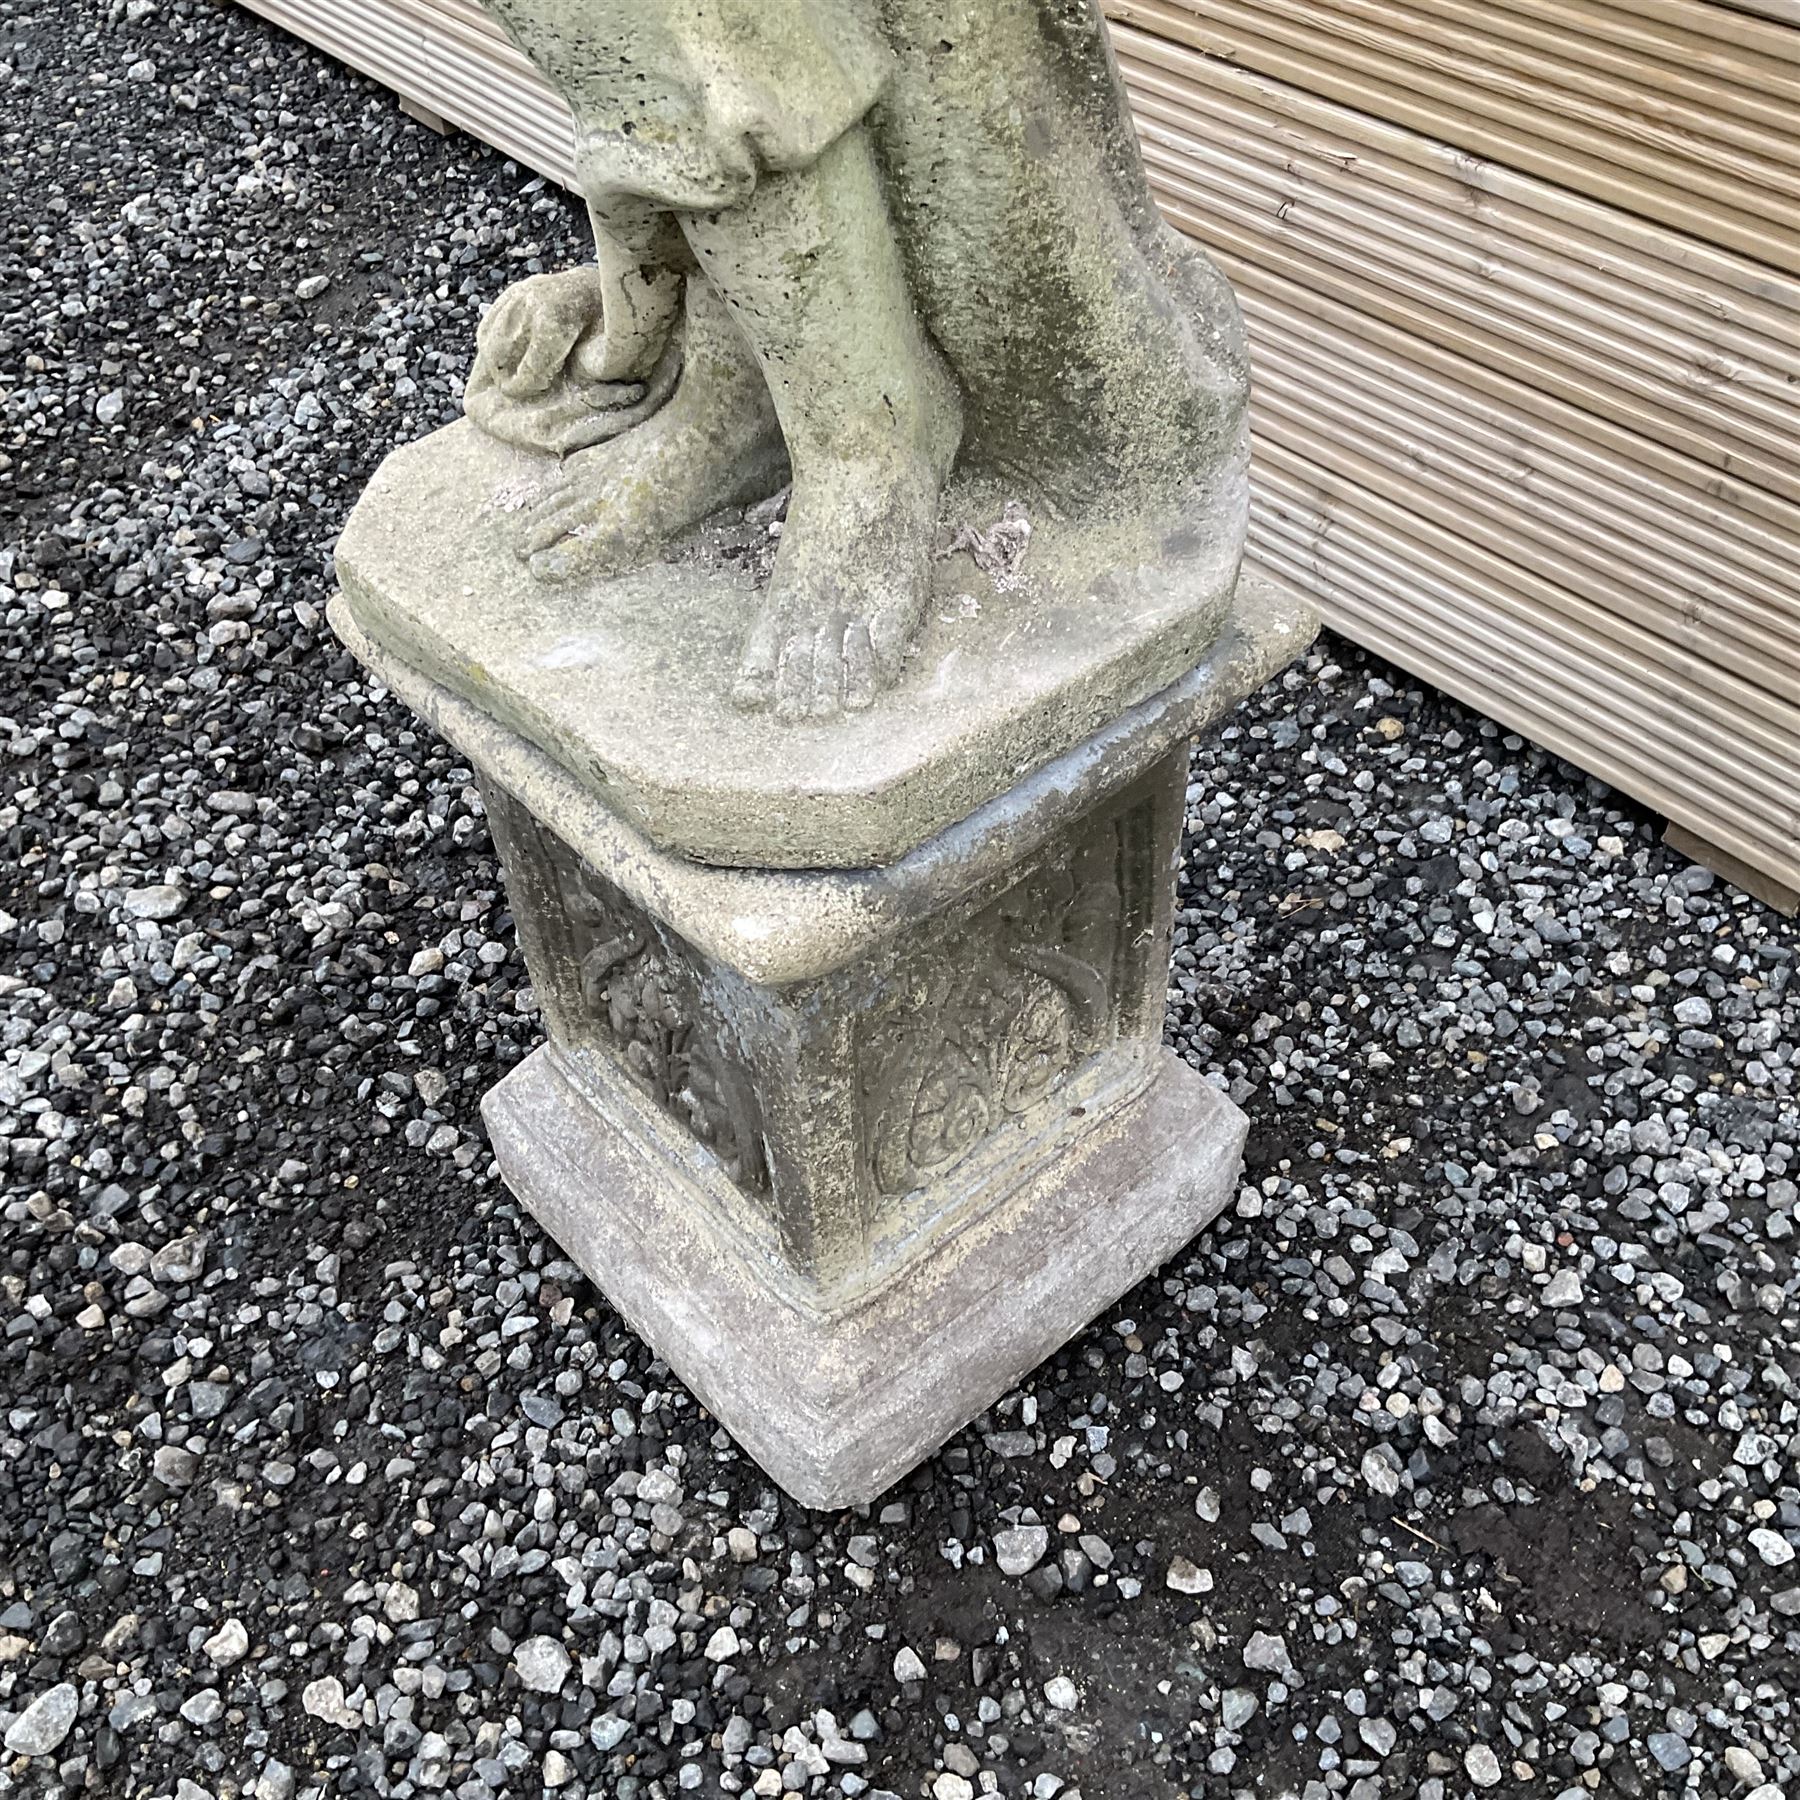 Cast stone garden figure of a woman with arms raised - Image 3 of 5